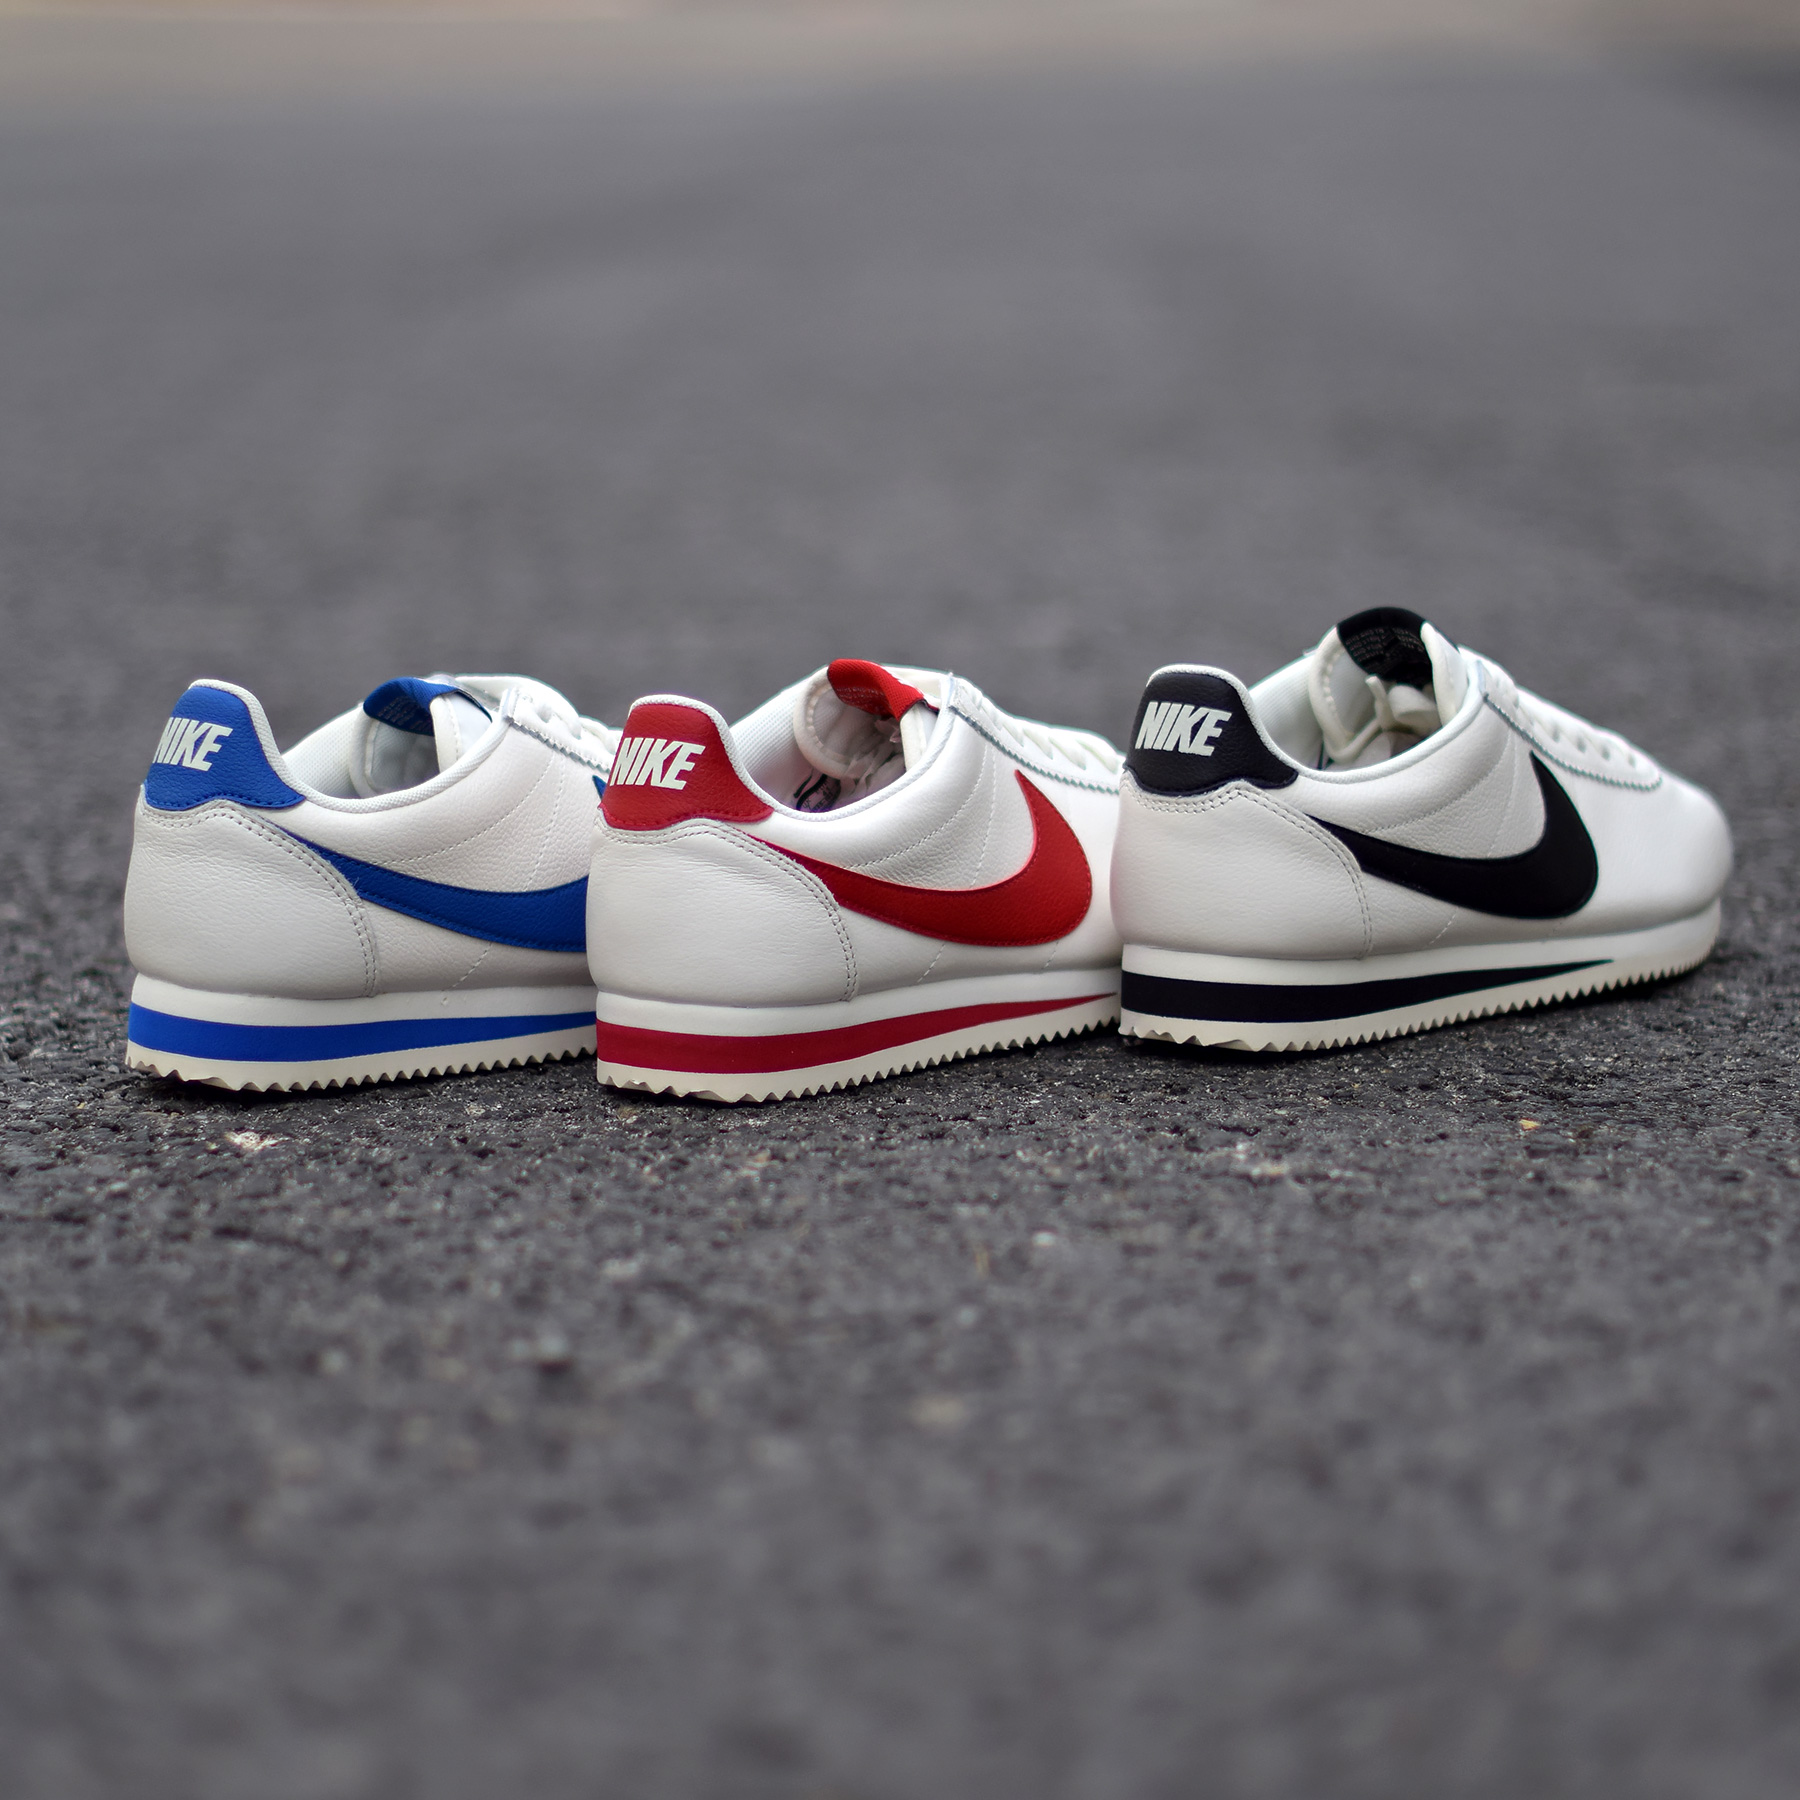 Nike Cortez Leather Vintage Pack - Sneakers.fr